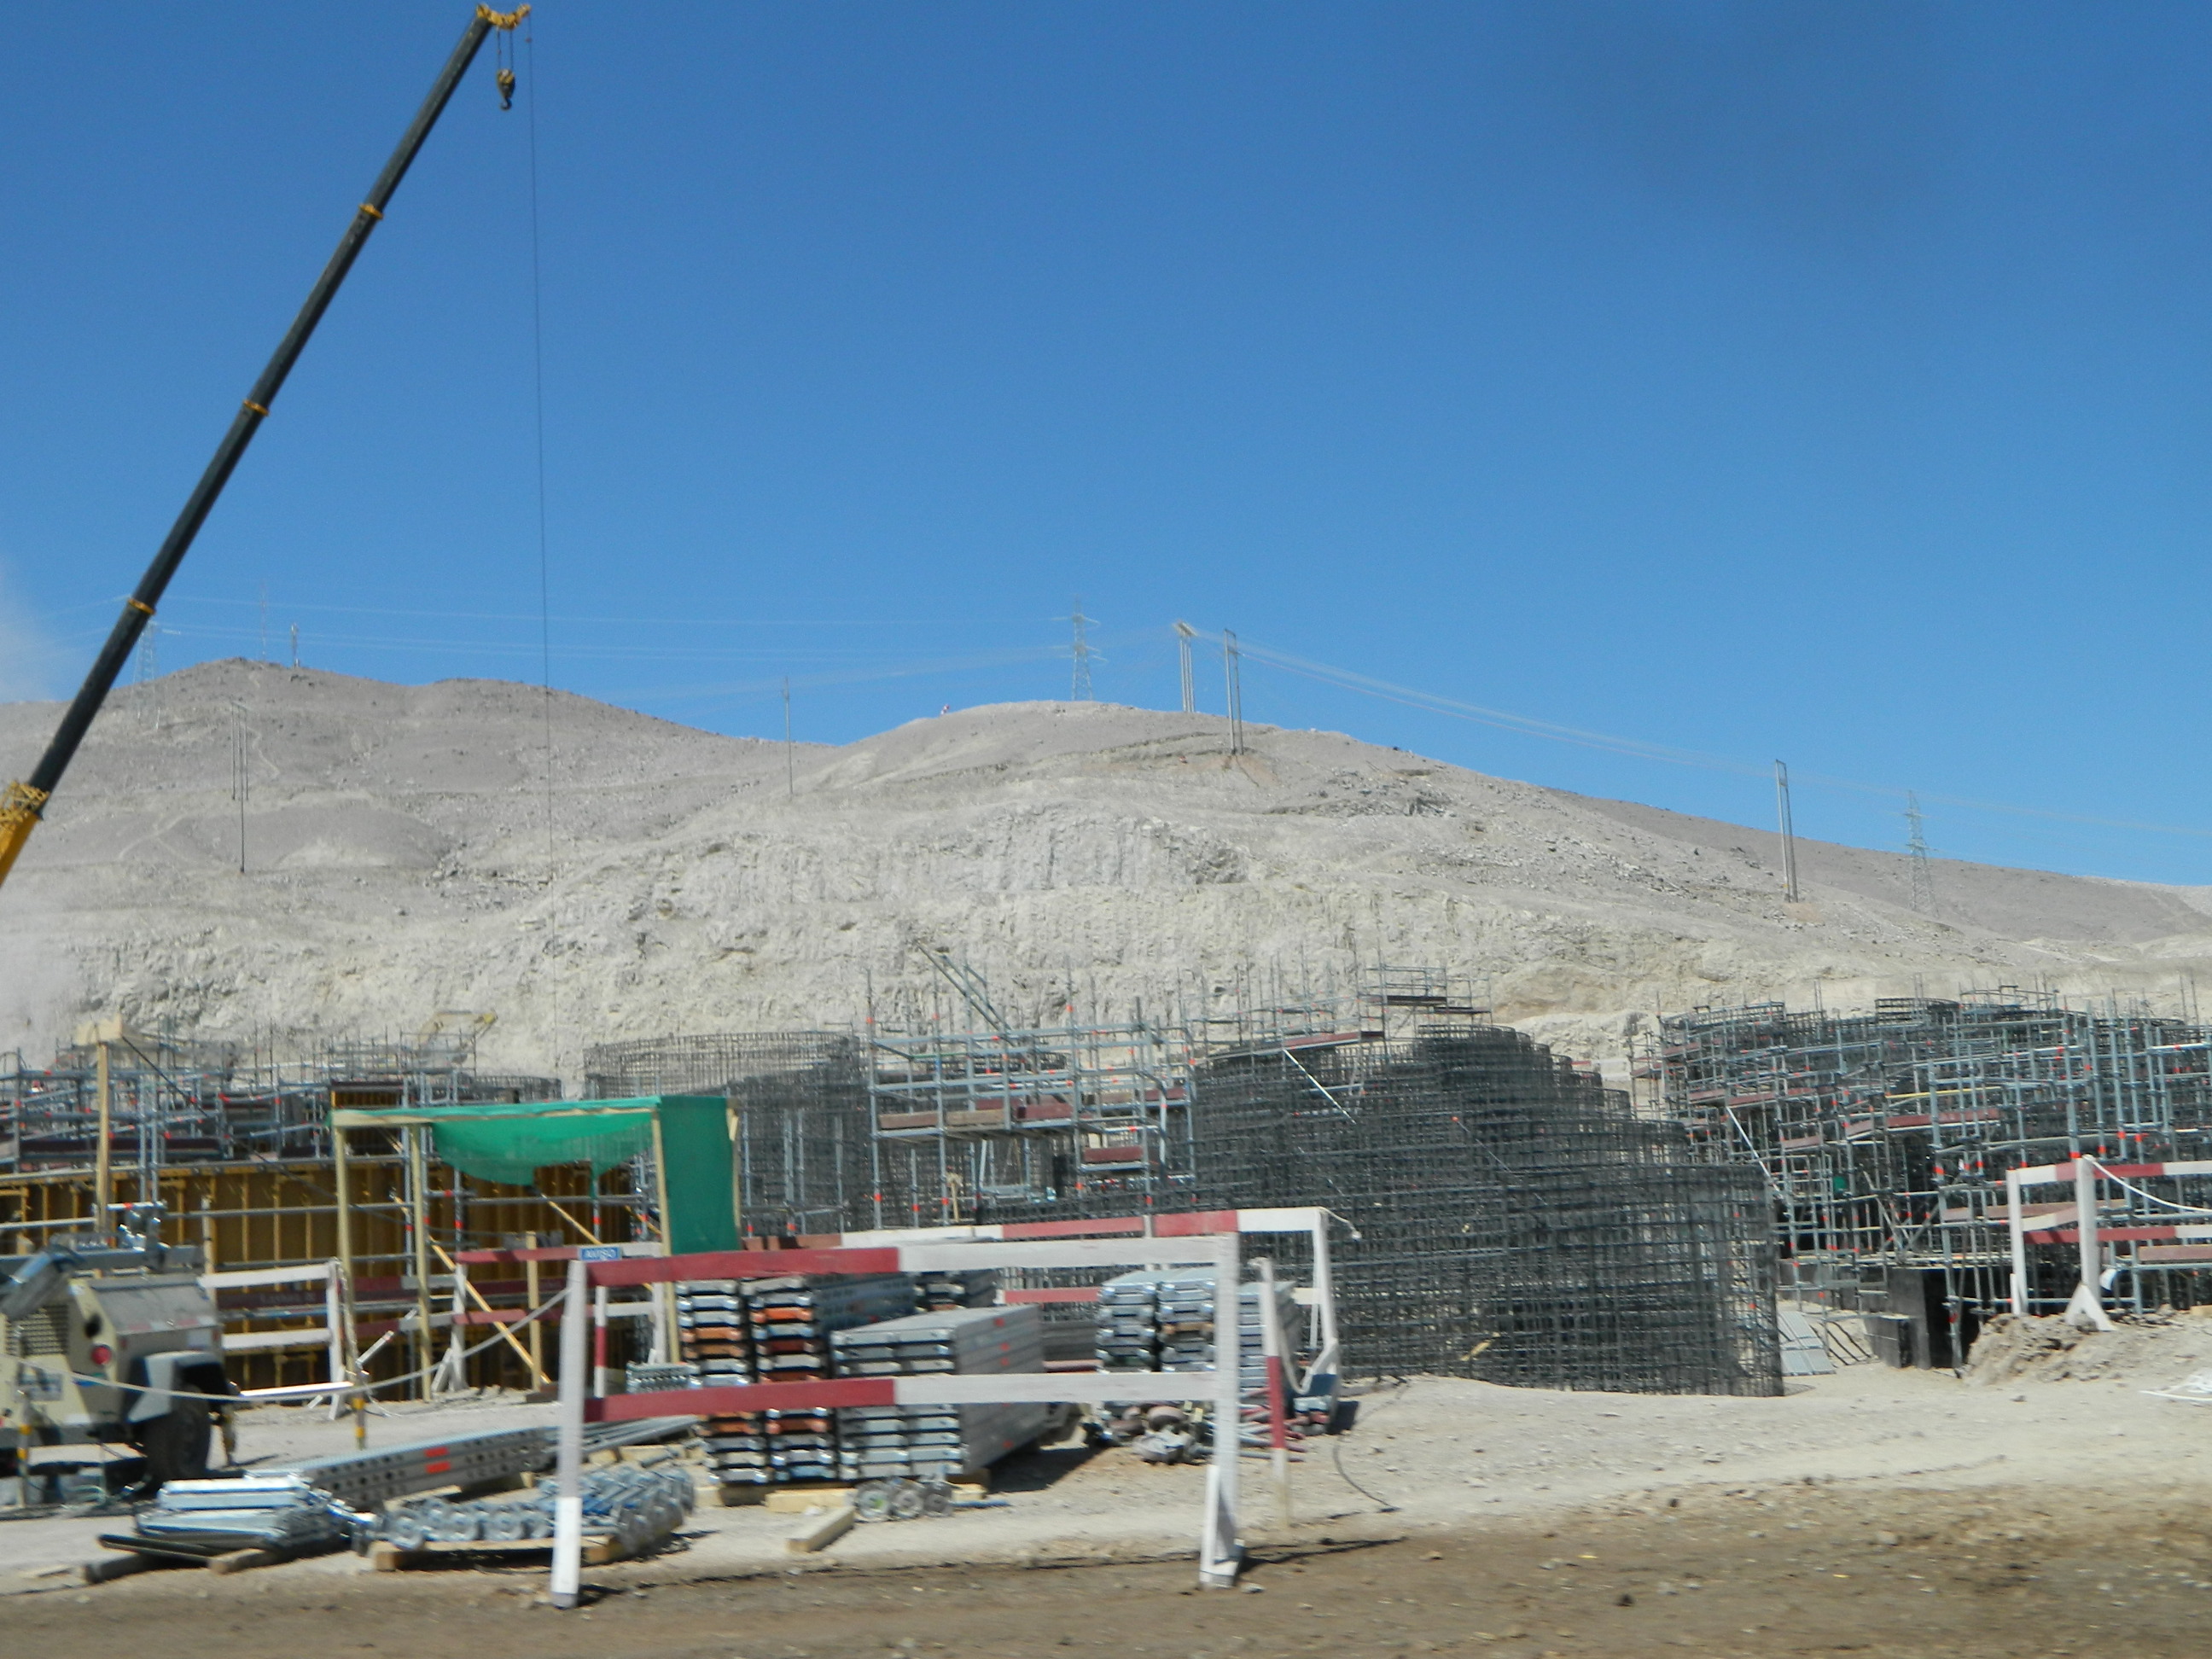 View of the Sierra Gordo construction site, with the arid Atacama Desert in the background.